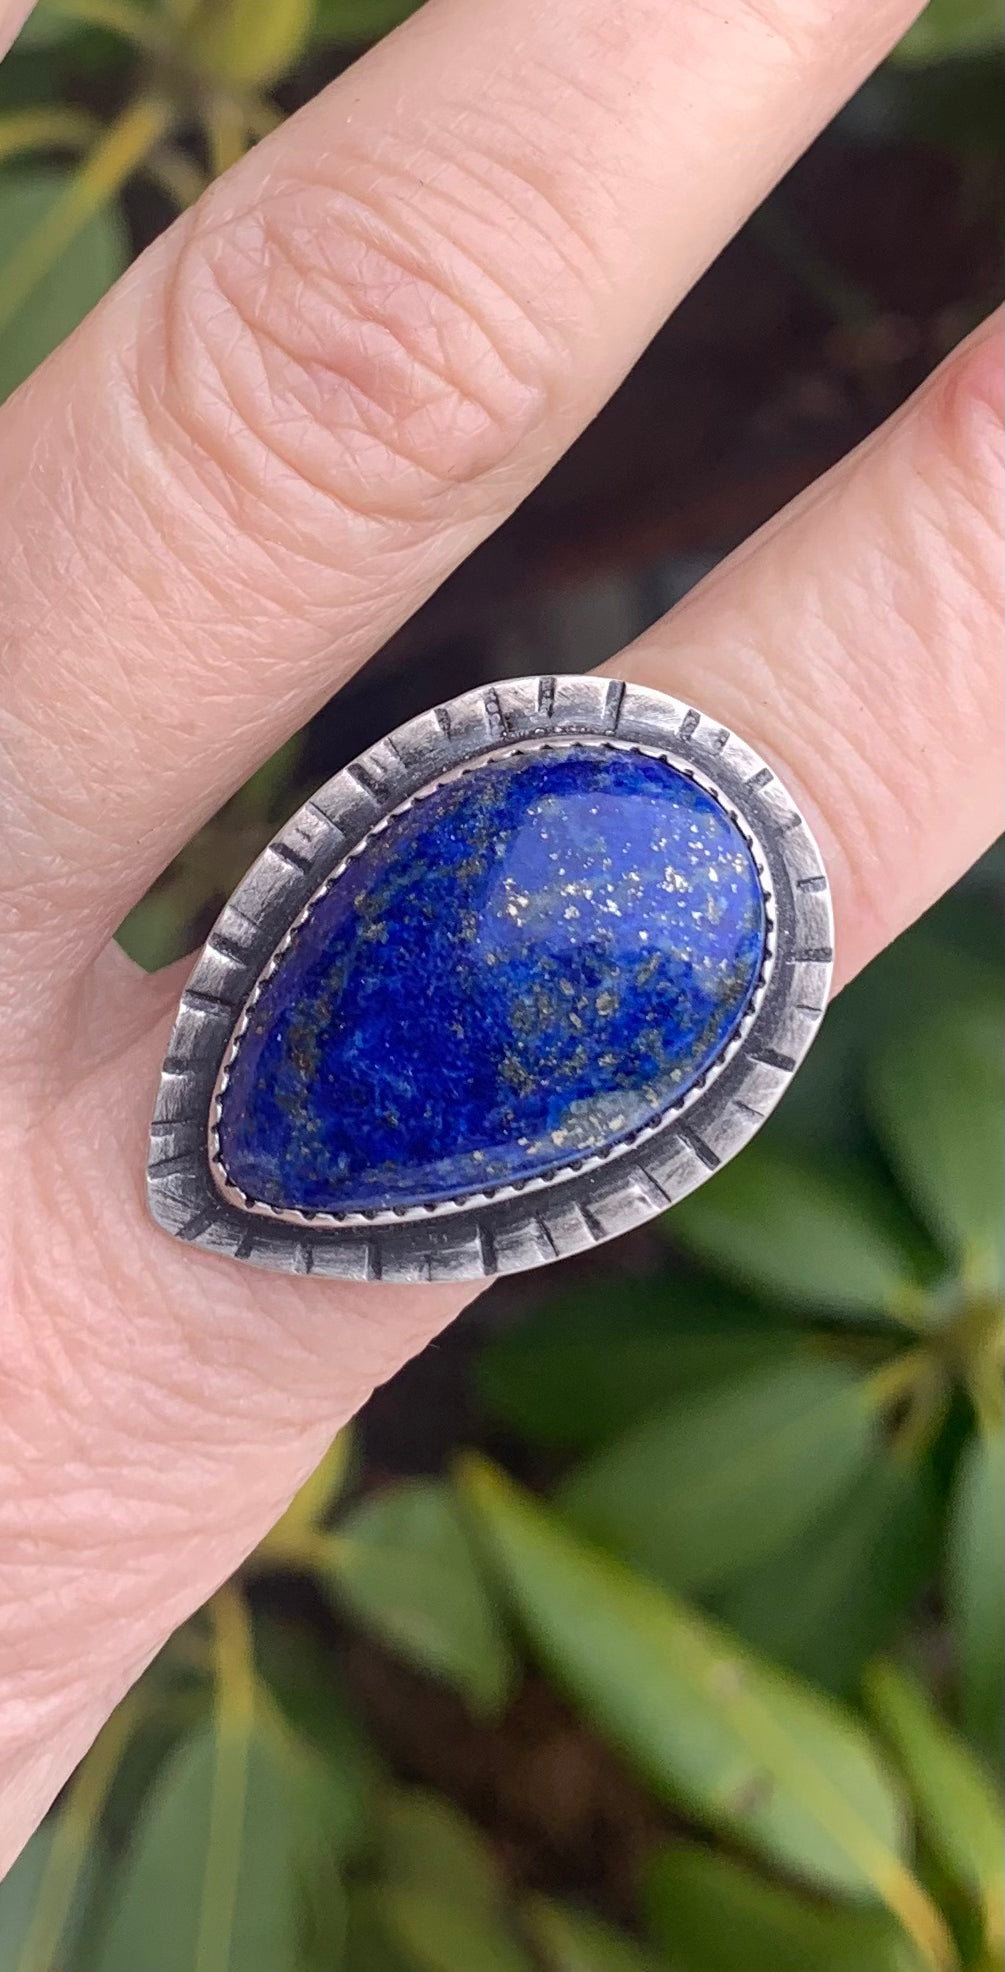 Large lapis and silver ring